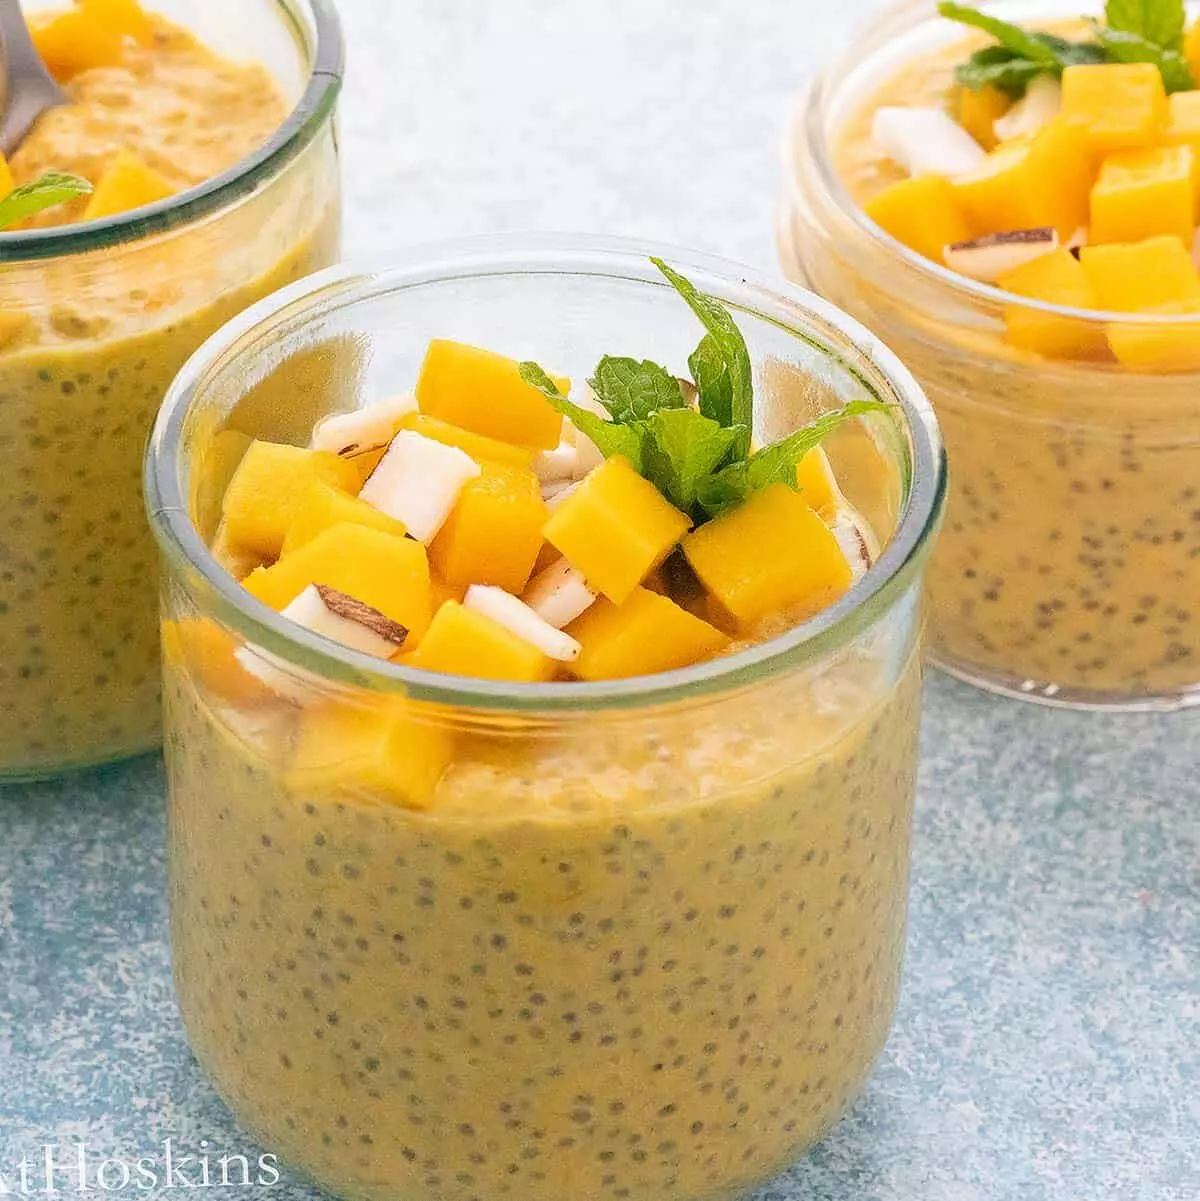 Creamy Mango Chia Pudding Recipe: Try this easy peasy sweet treat prepared with the goodness of mangoes, coconut milk and protein-rich chia seeds